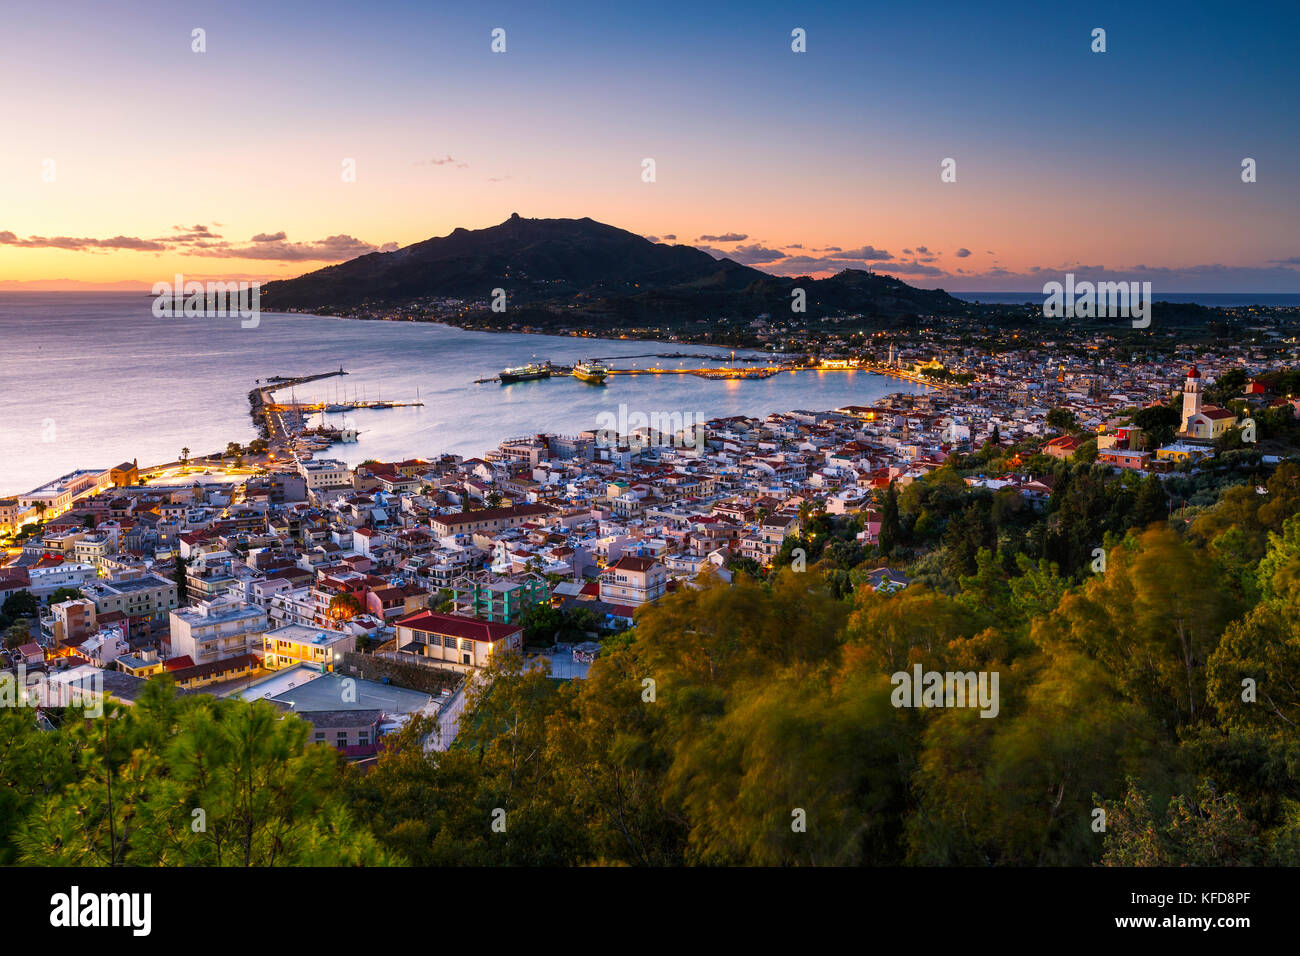 Sunrise over Zakynthos town and its harbour, Greece. Stock Photo